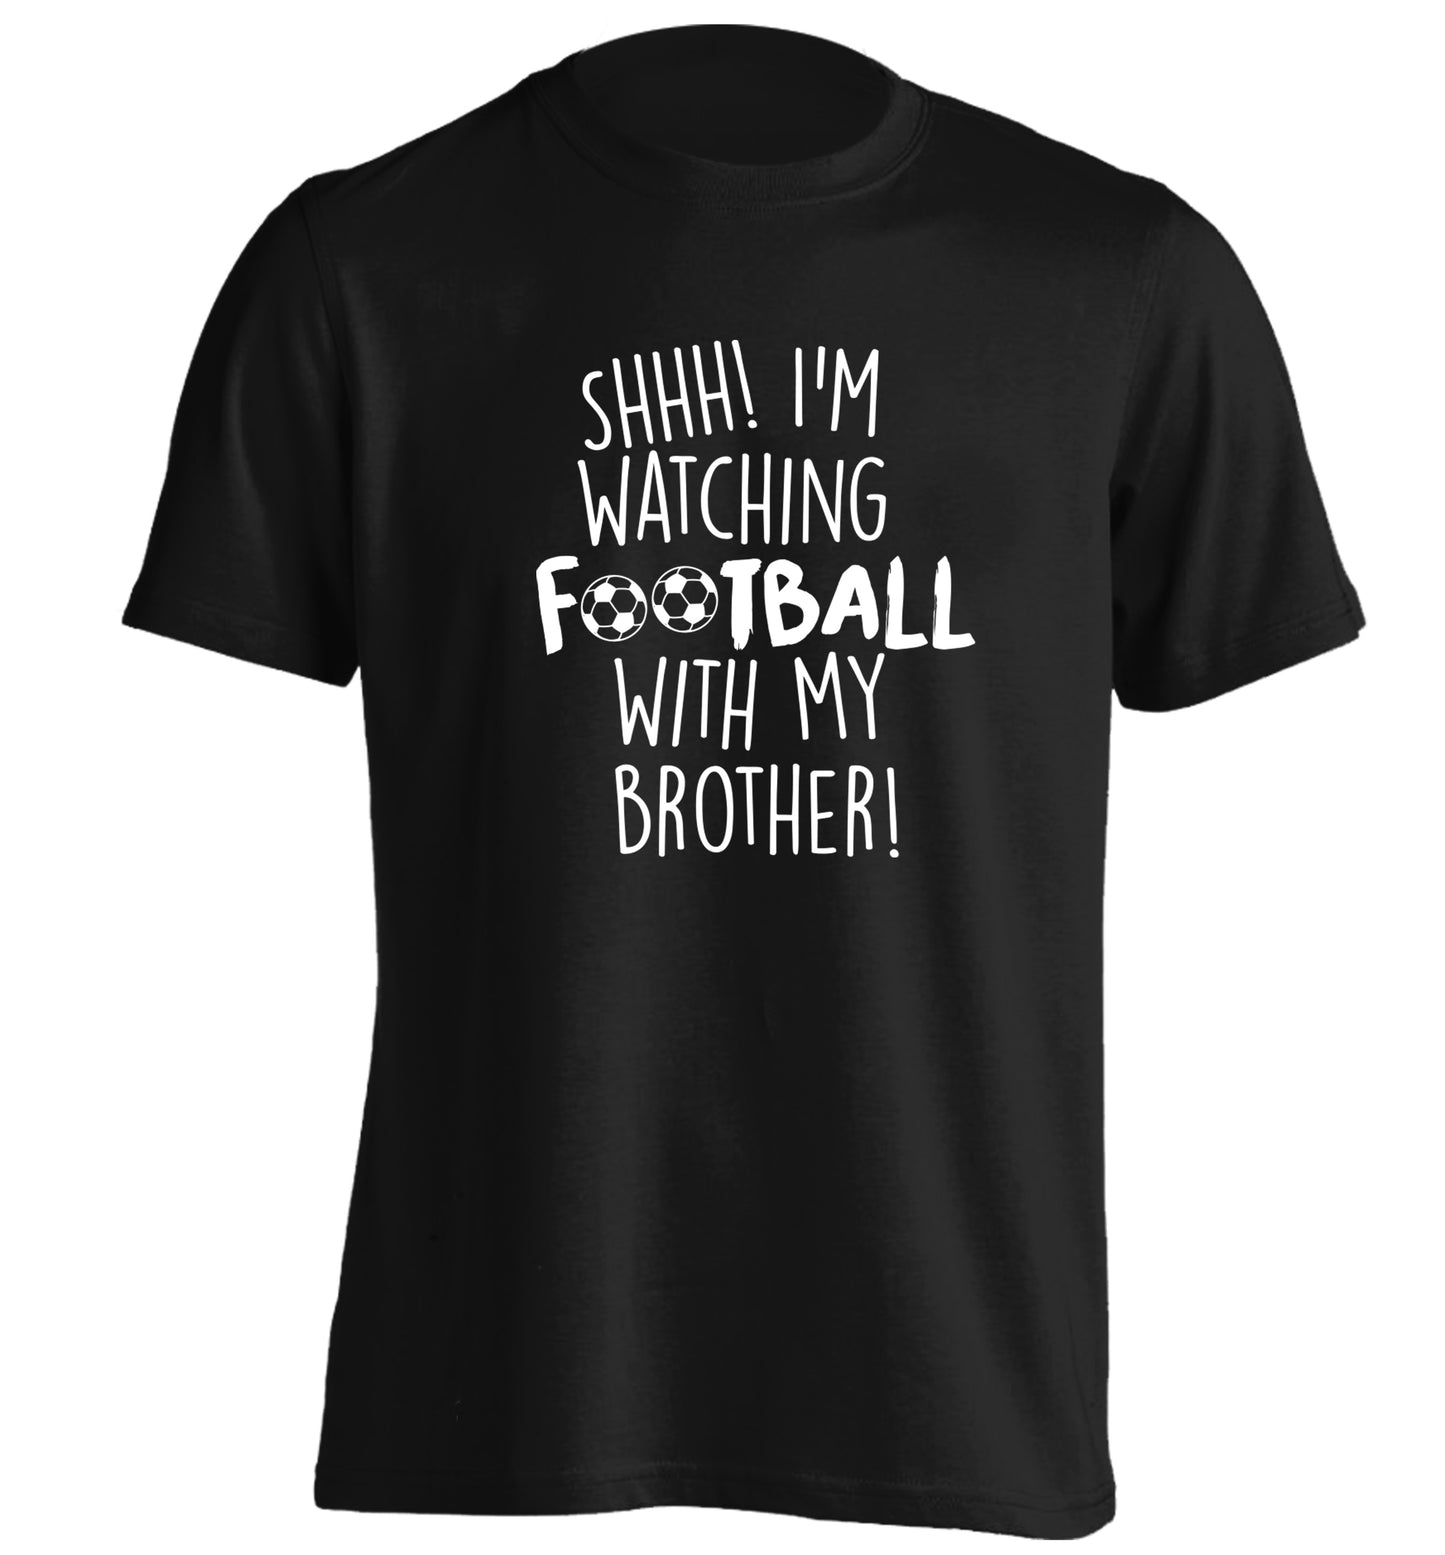 Shhh I'm watching football with my brother adults unisexblack Tshirt 2XL